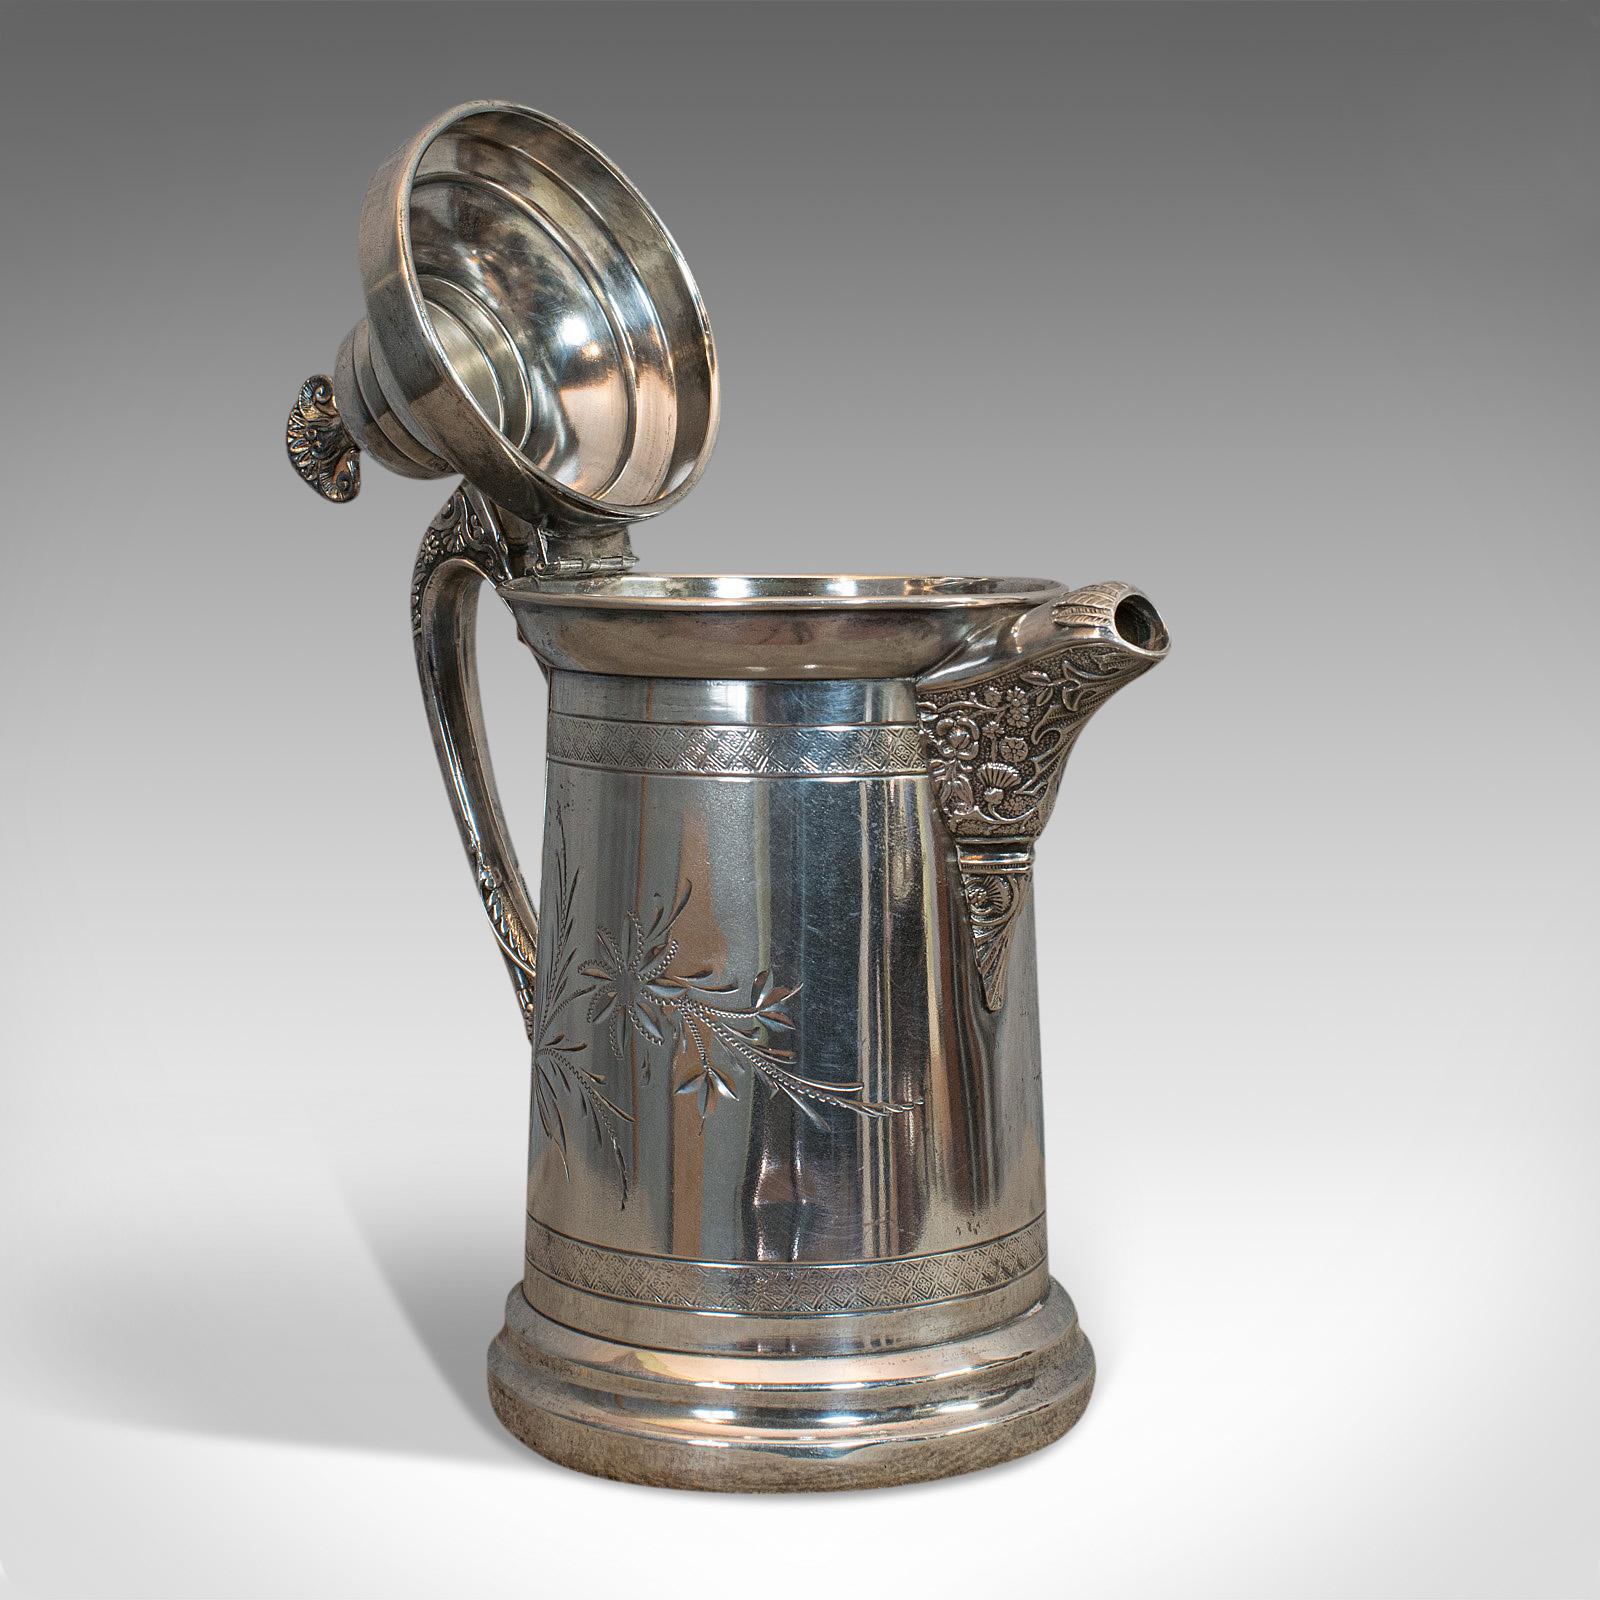 This is an antique coffee pot. An English, silver plated beverage jug, dating to the late 19th century, circa 1900.

Attractive coffee jug with fine engraved detail
Displays a desirable aged patina
Plate silver in very good order
Bright, polish